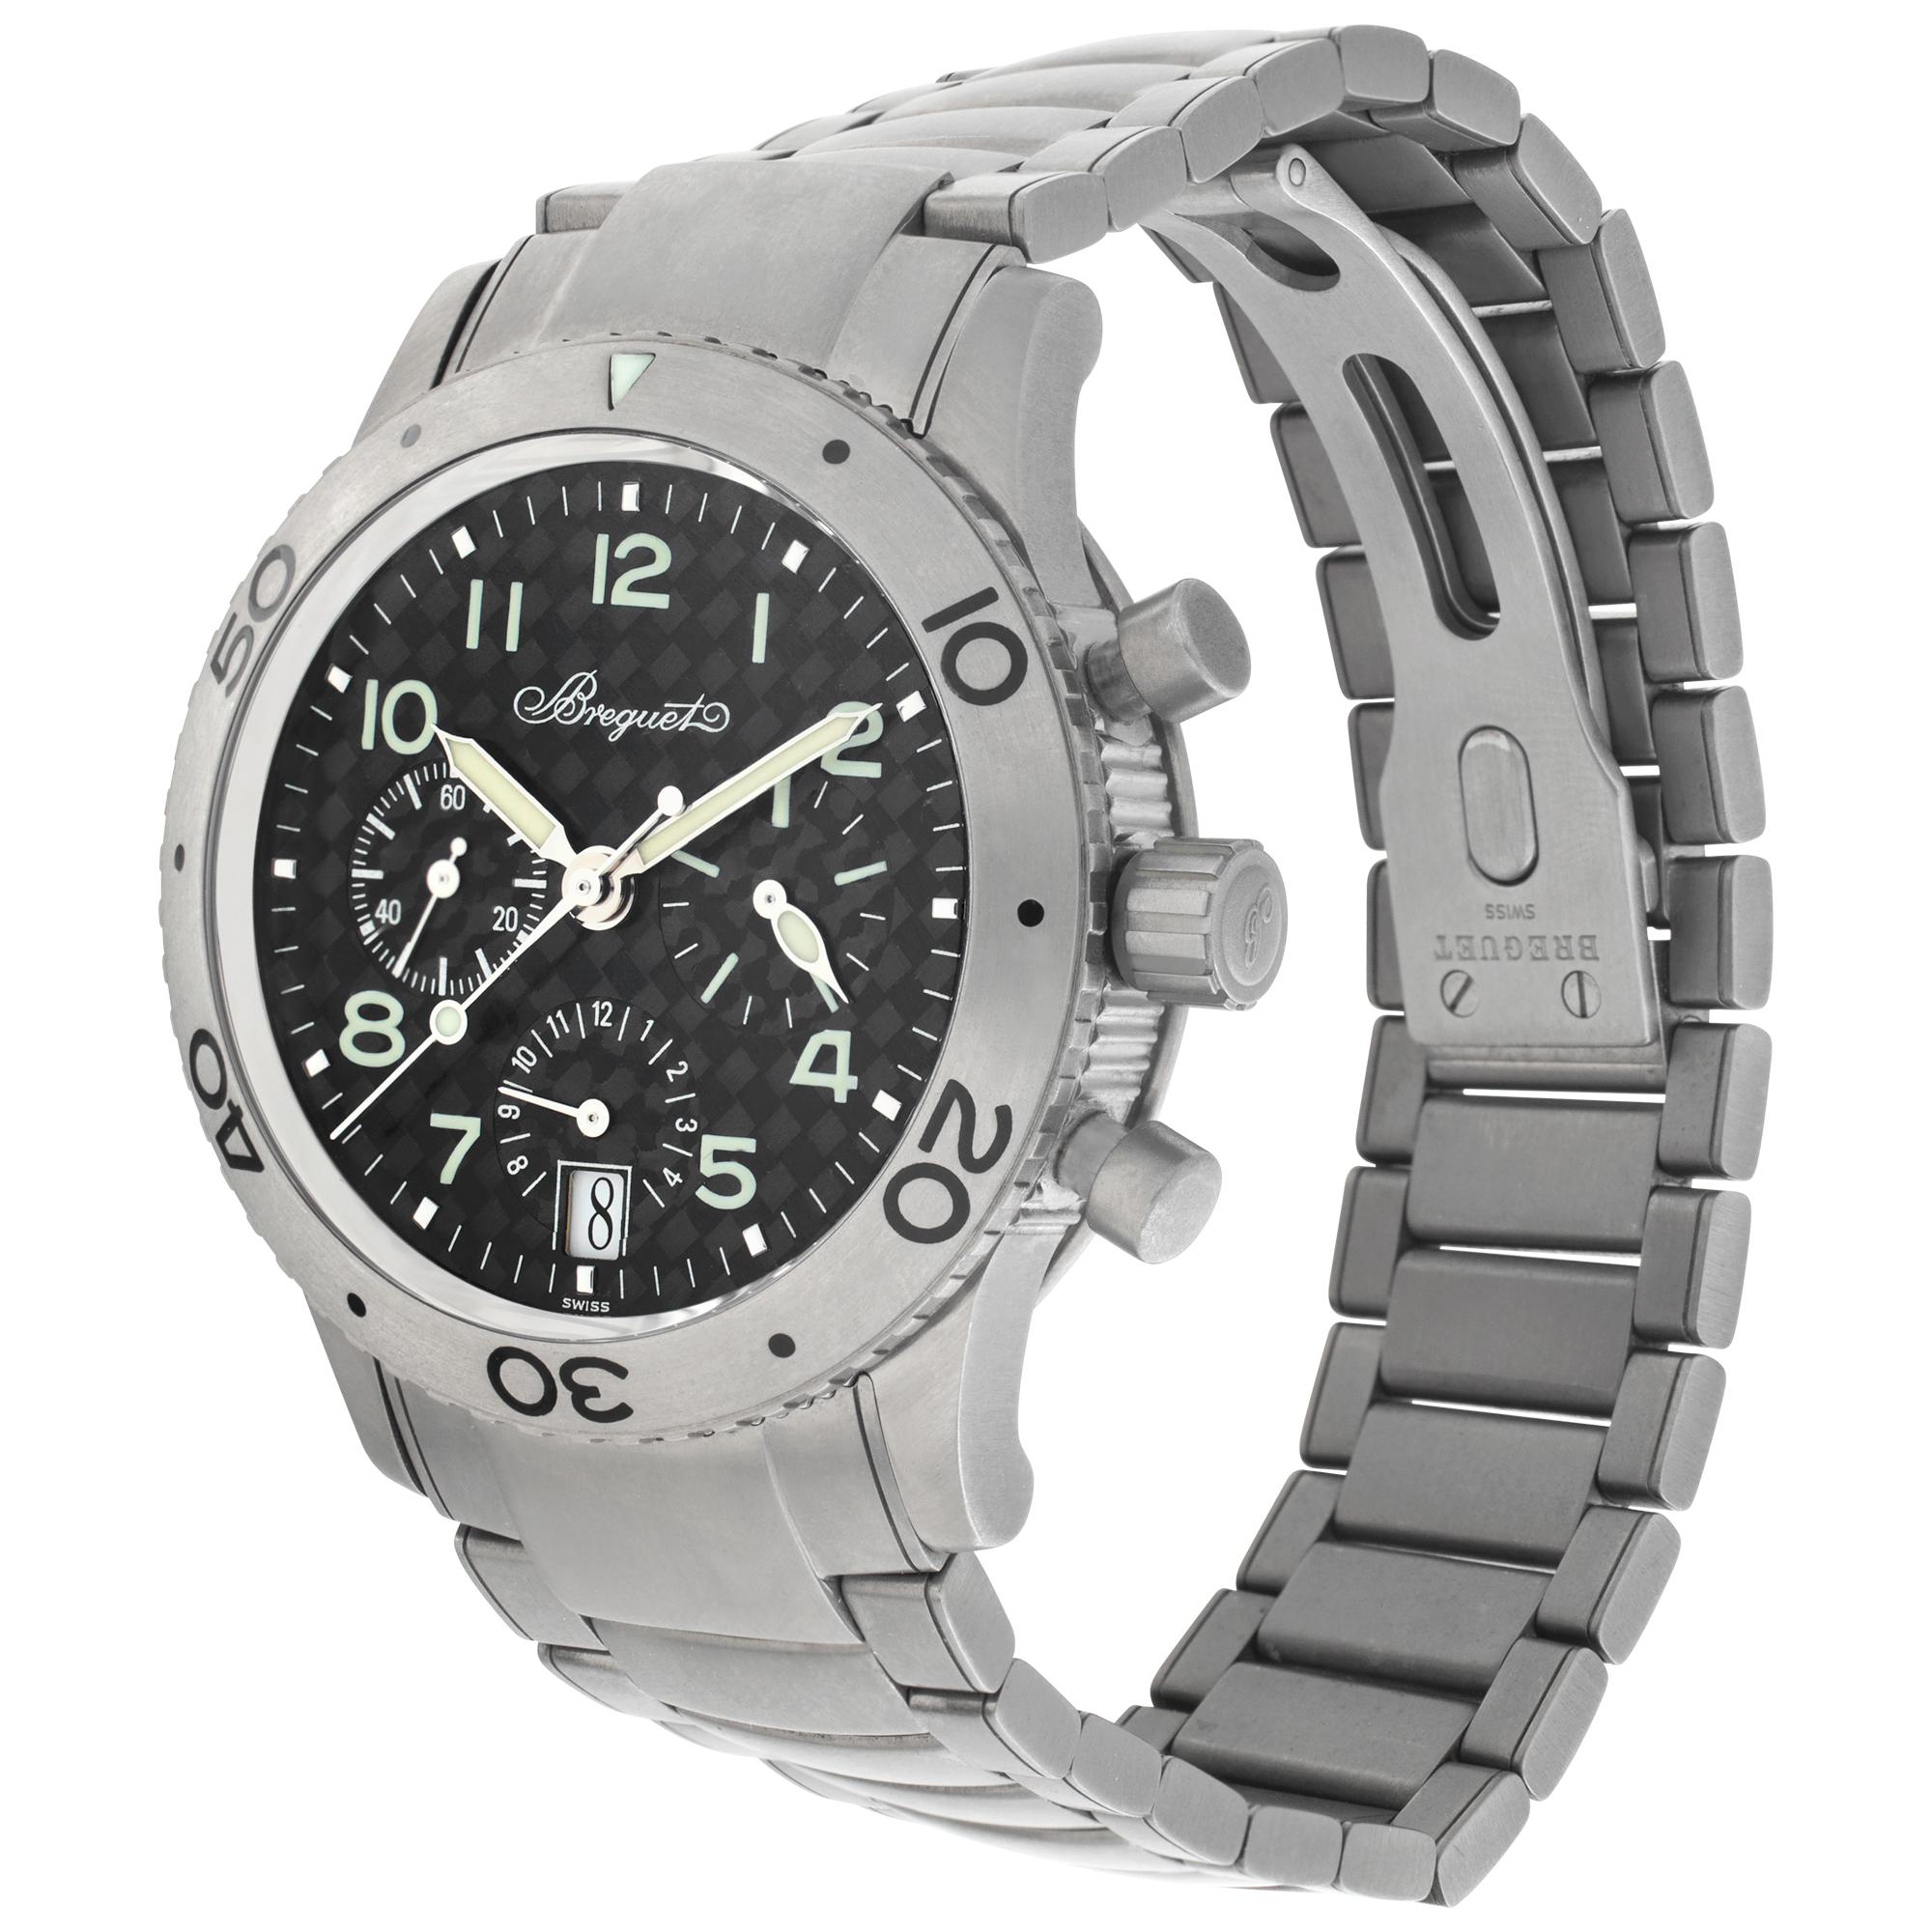 Breguet Type XX Transatlantique in titanium featuring black arabic numeral dial with chronograph. With original box and papers. Automatic with sweep seconds and date. 40mm case size. Circa 2009. Ref. 3820TI Fine Pre-owned Breguet Watch. Certified